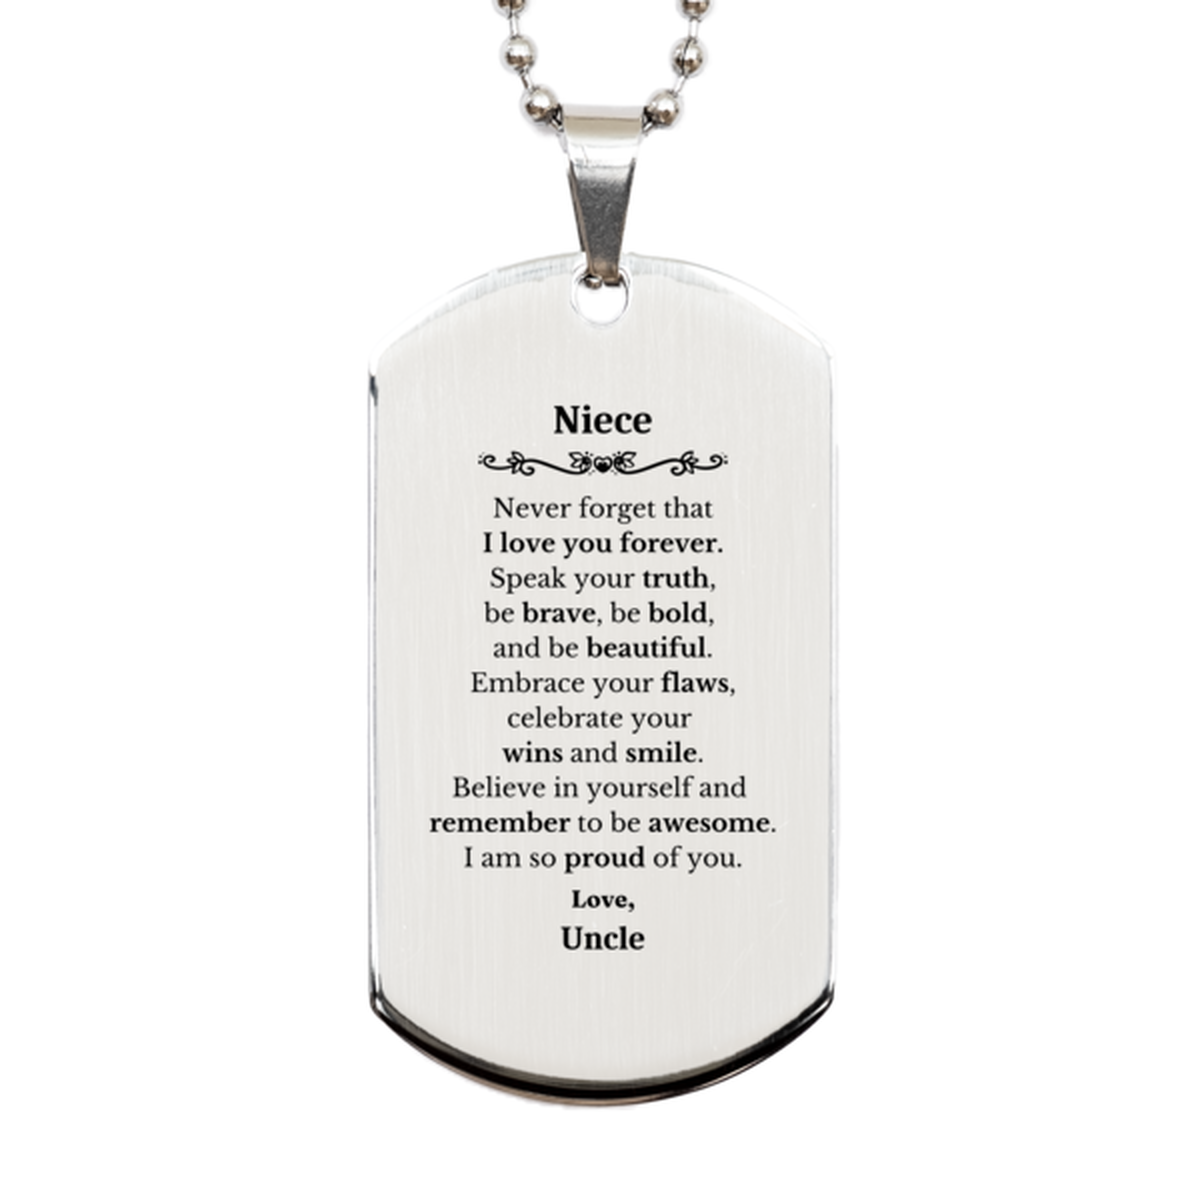 Niece Silver Dog Tag, Never forget that I love you forever, Inspirational Niece Birthday Unique Gifts From Uncle